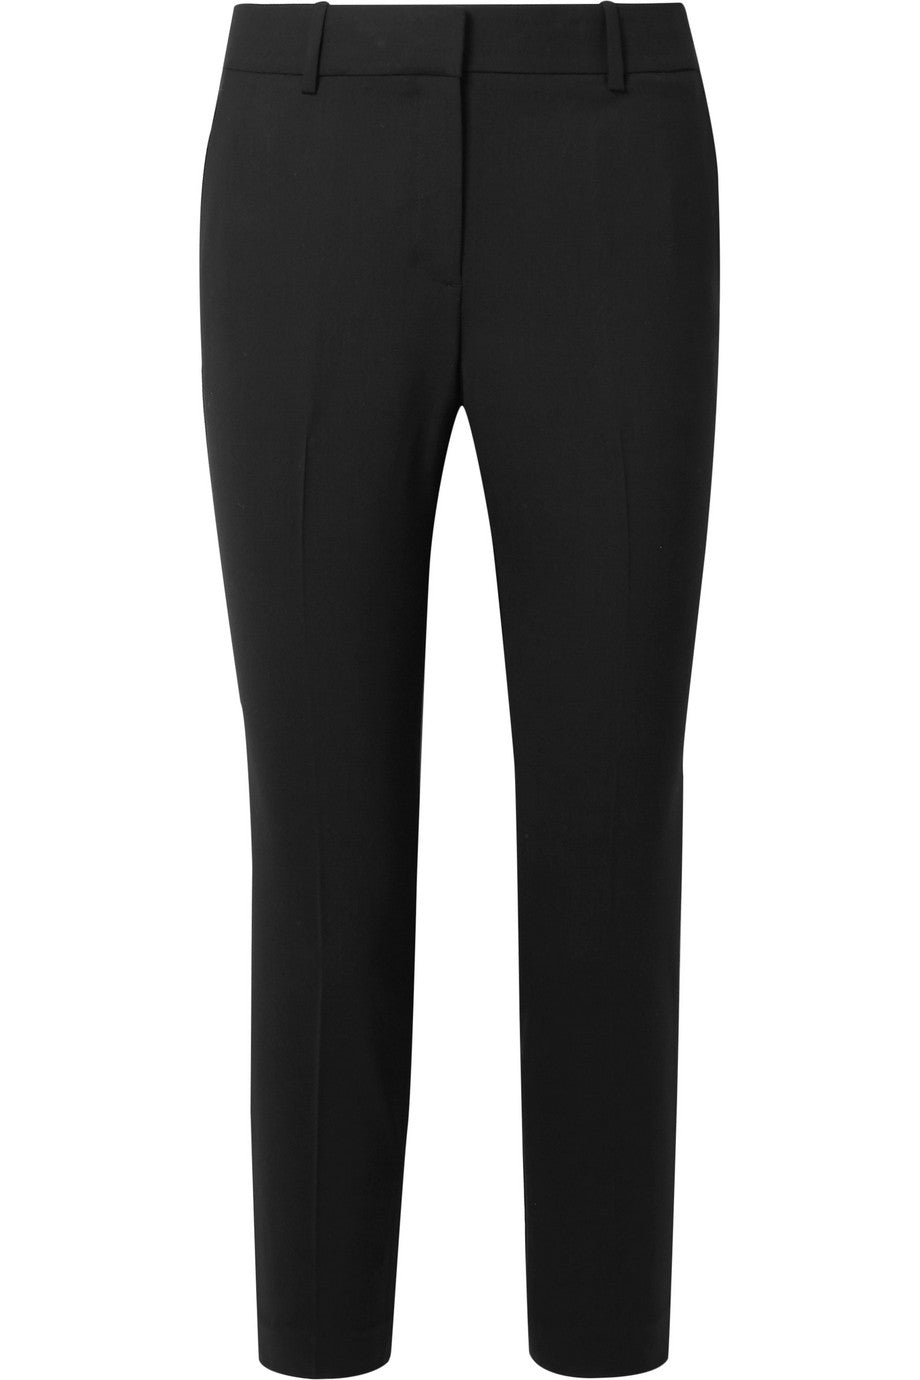 Theory - Black tapered slim-fit 'Treeca 2' stretch wool tapered pants trousers